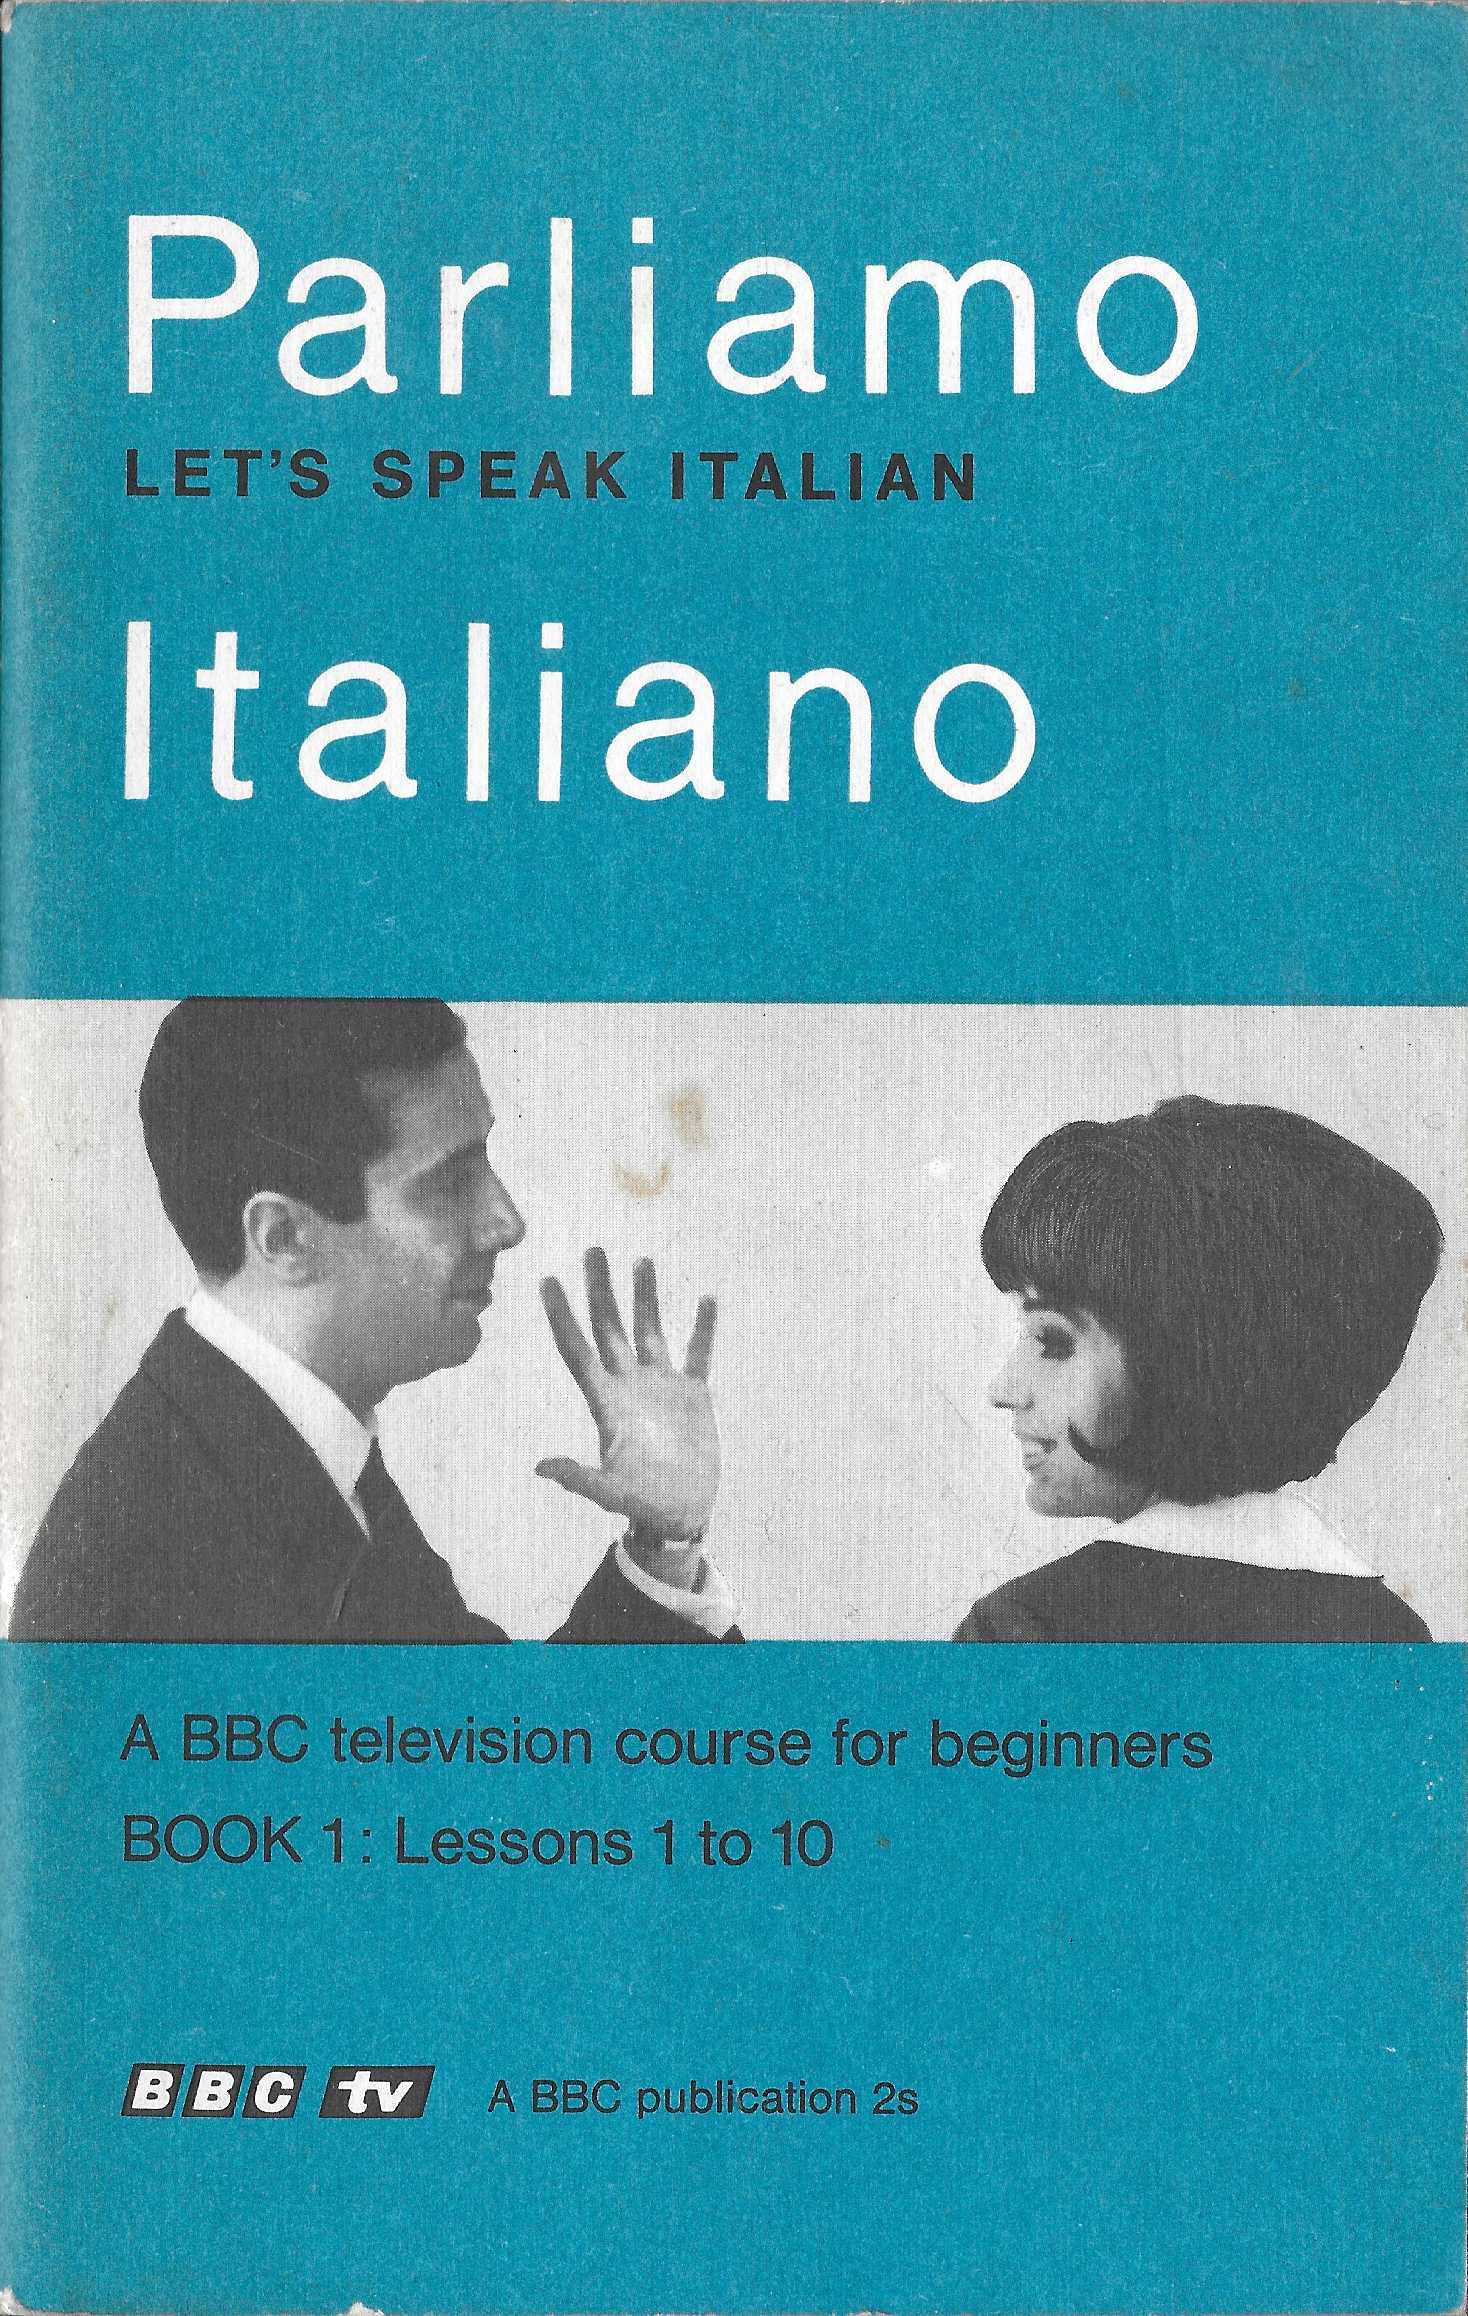 Picture of Parliamo Italiano - Let's Speak Italian lessons 1 - 10 by artist Toni Cerutti from the BBC books - Records and Tapes library